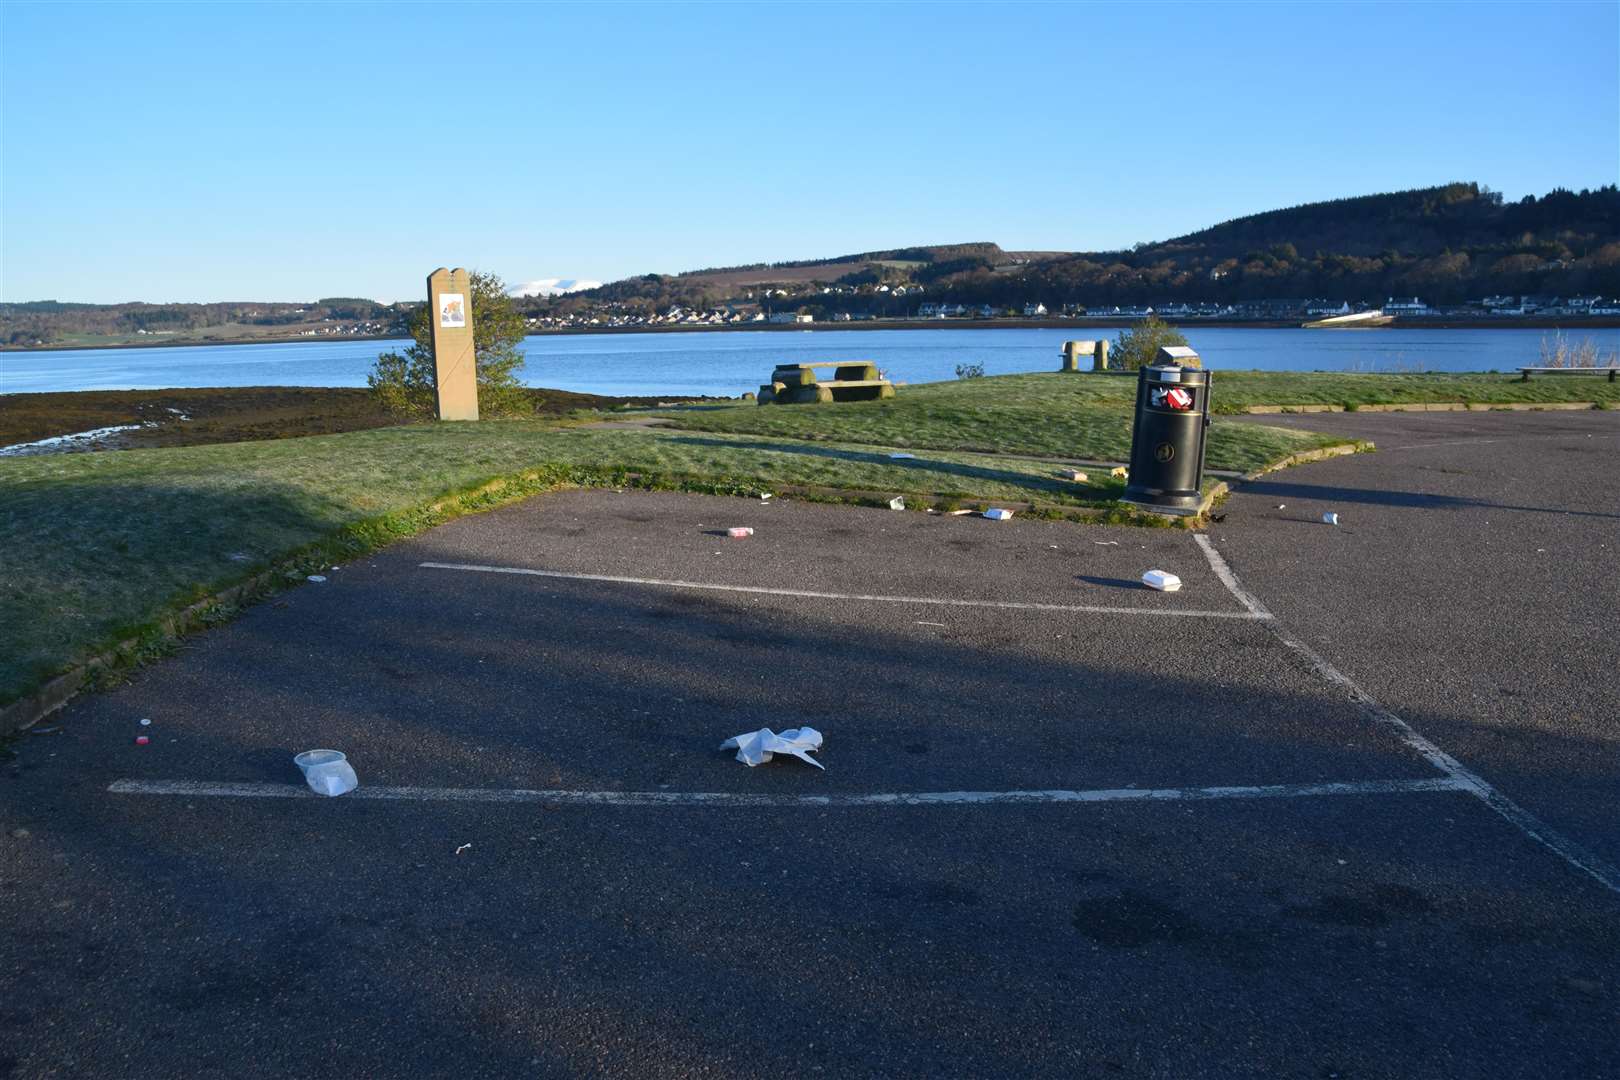 Litter is already a problem in some areas such as South Kessock with overflowing bins and dropped lager bottles but could get worse due to the strike.